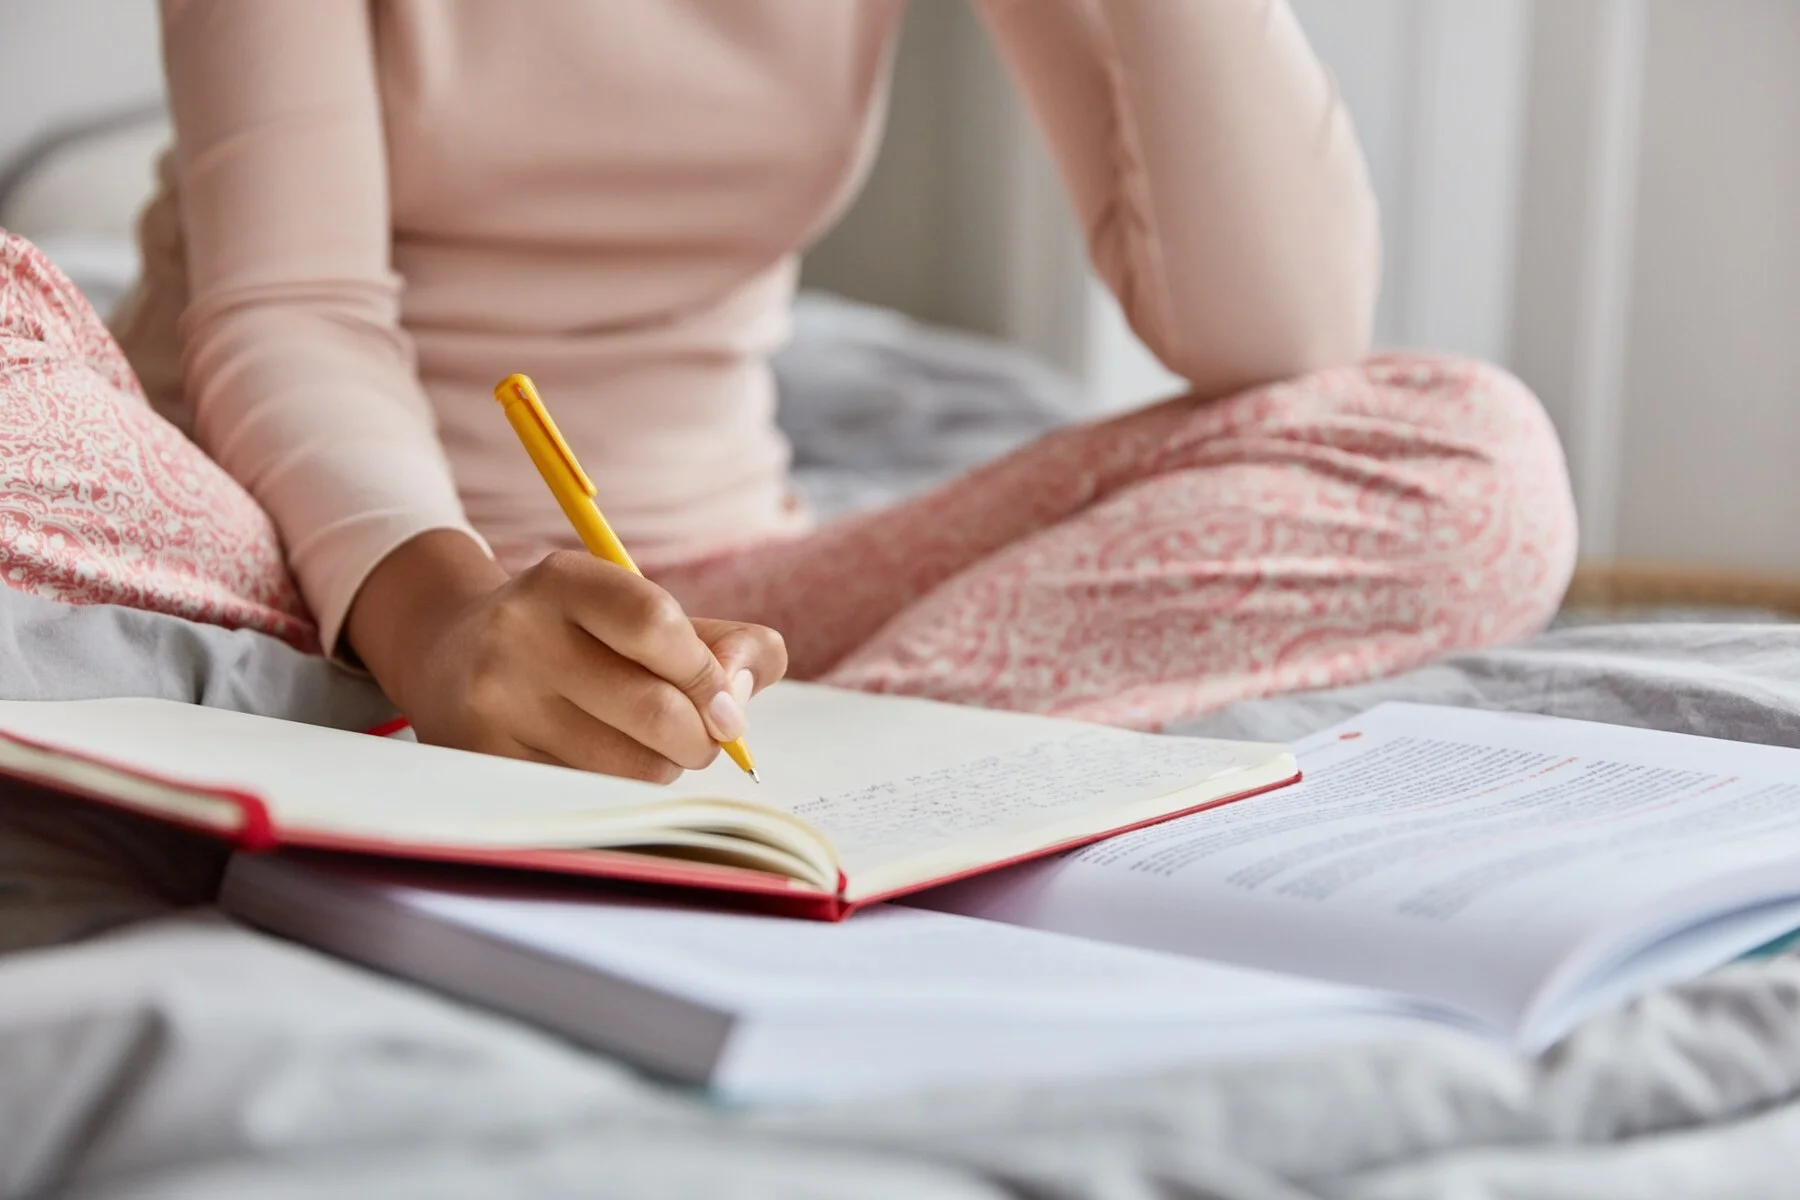 cropped image unrecognizable woman nightclothes writes down information notepad rewrites topic from textbook poses bed alone has nice handwriting close up shot focus writing 273609 29021